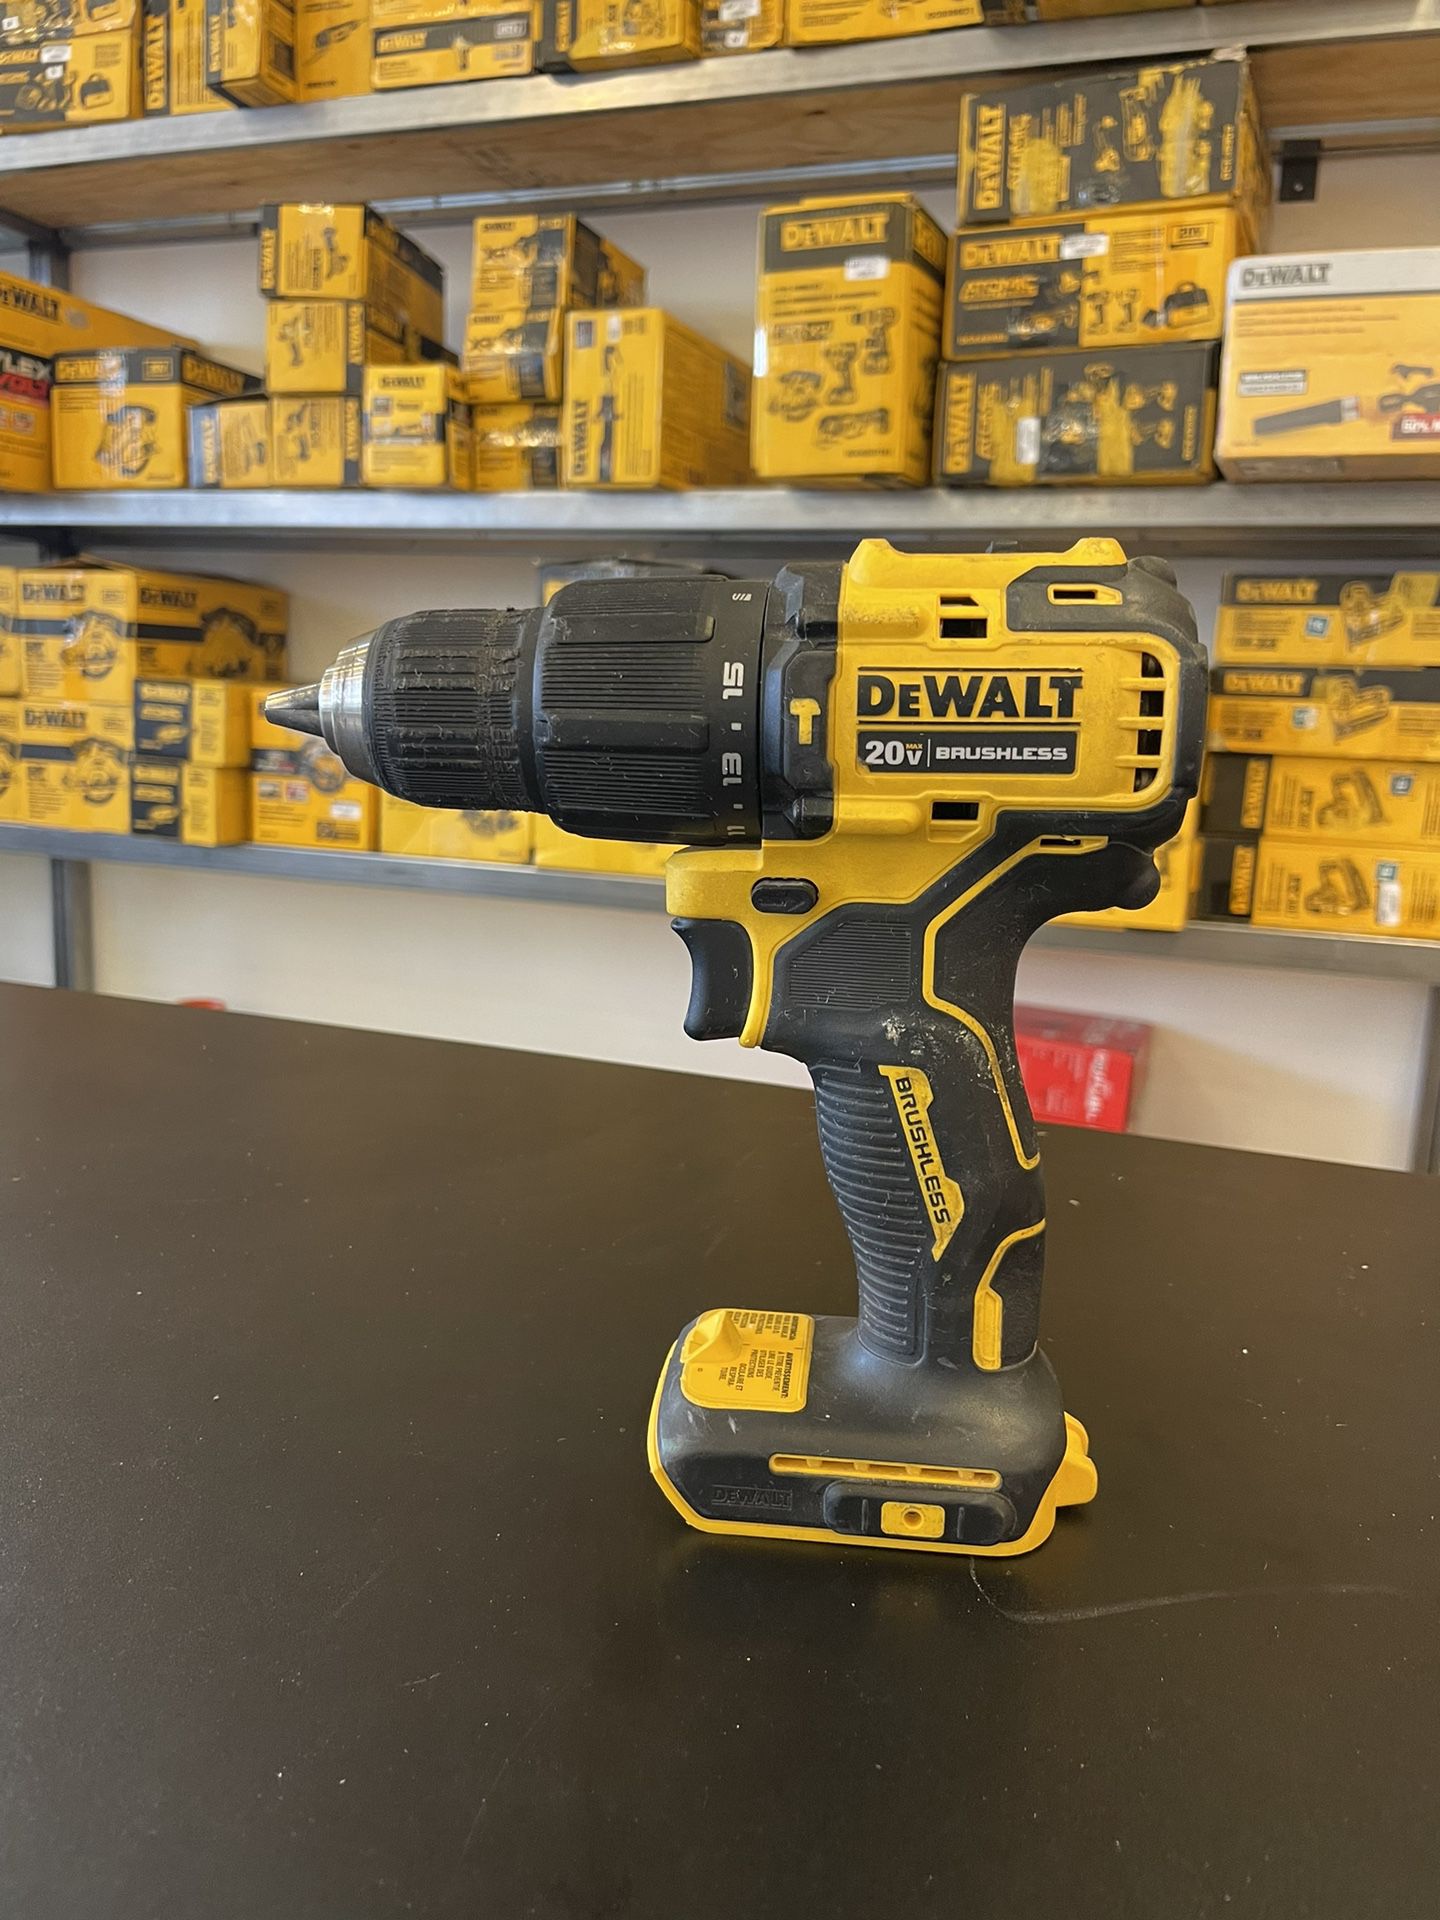 bassin farmaceut Allergi DEWALT ATOMIC 20-Volt MAX Cordless Brushless Compact 1/2 in. Hammer Drill  (Tool-Only)…..DCD709 for Sale in Las Vegas, NV - OfferUp